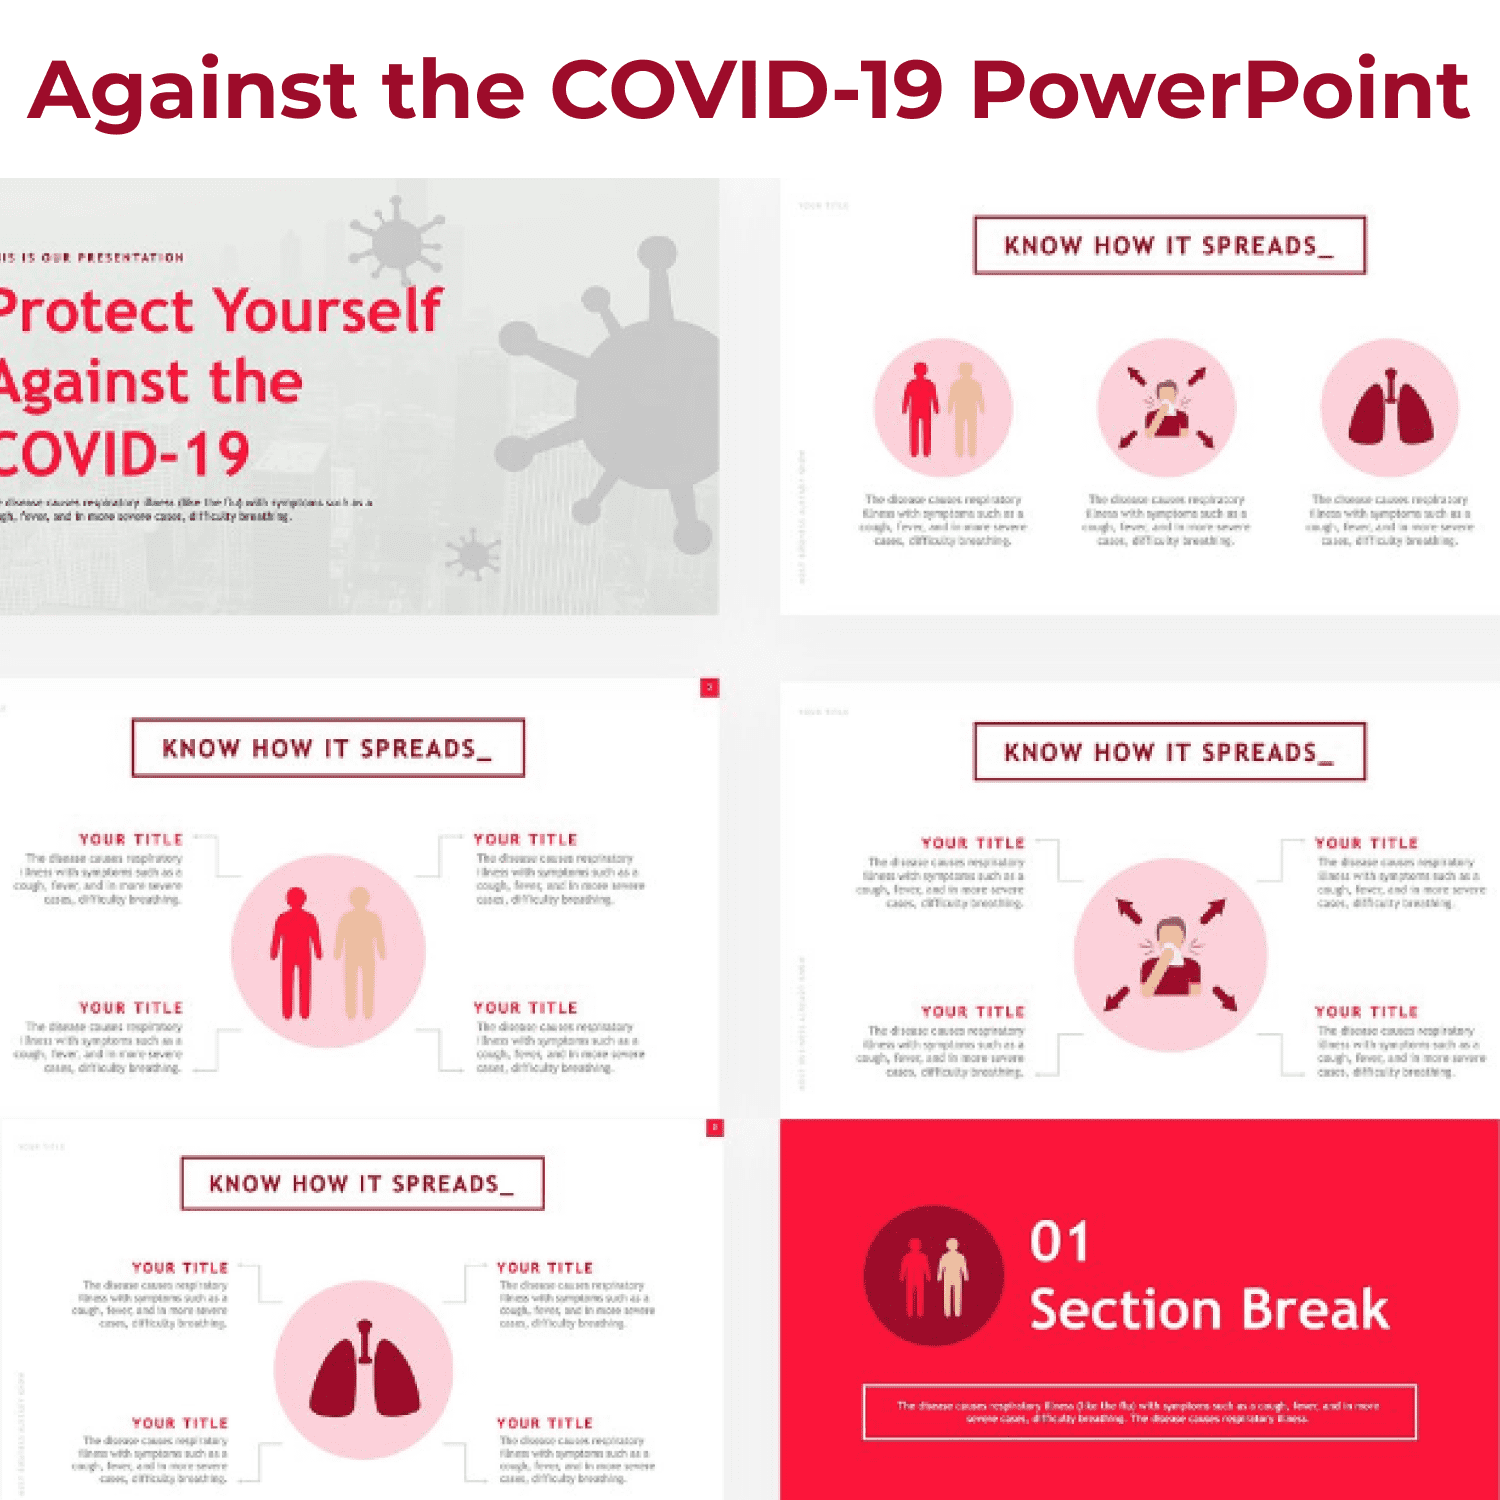 Against the COVID-19 PowerPoint cover image.